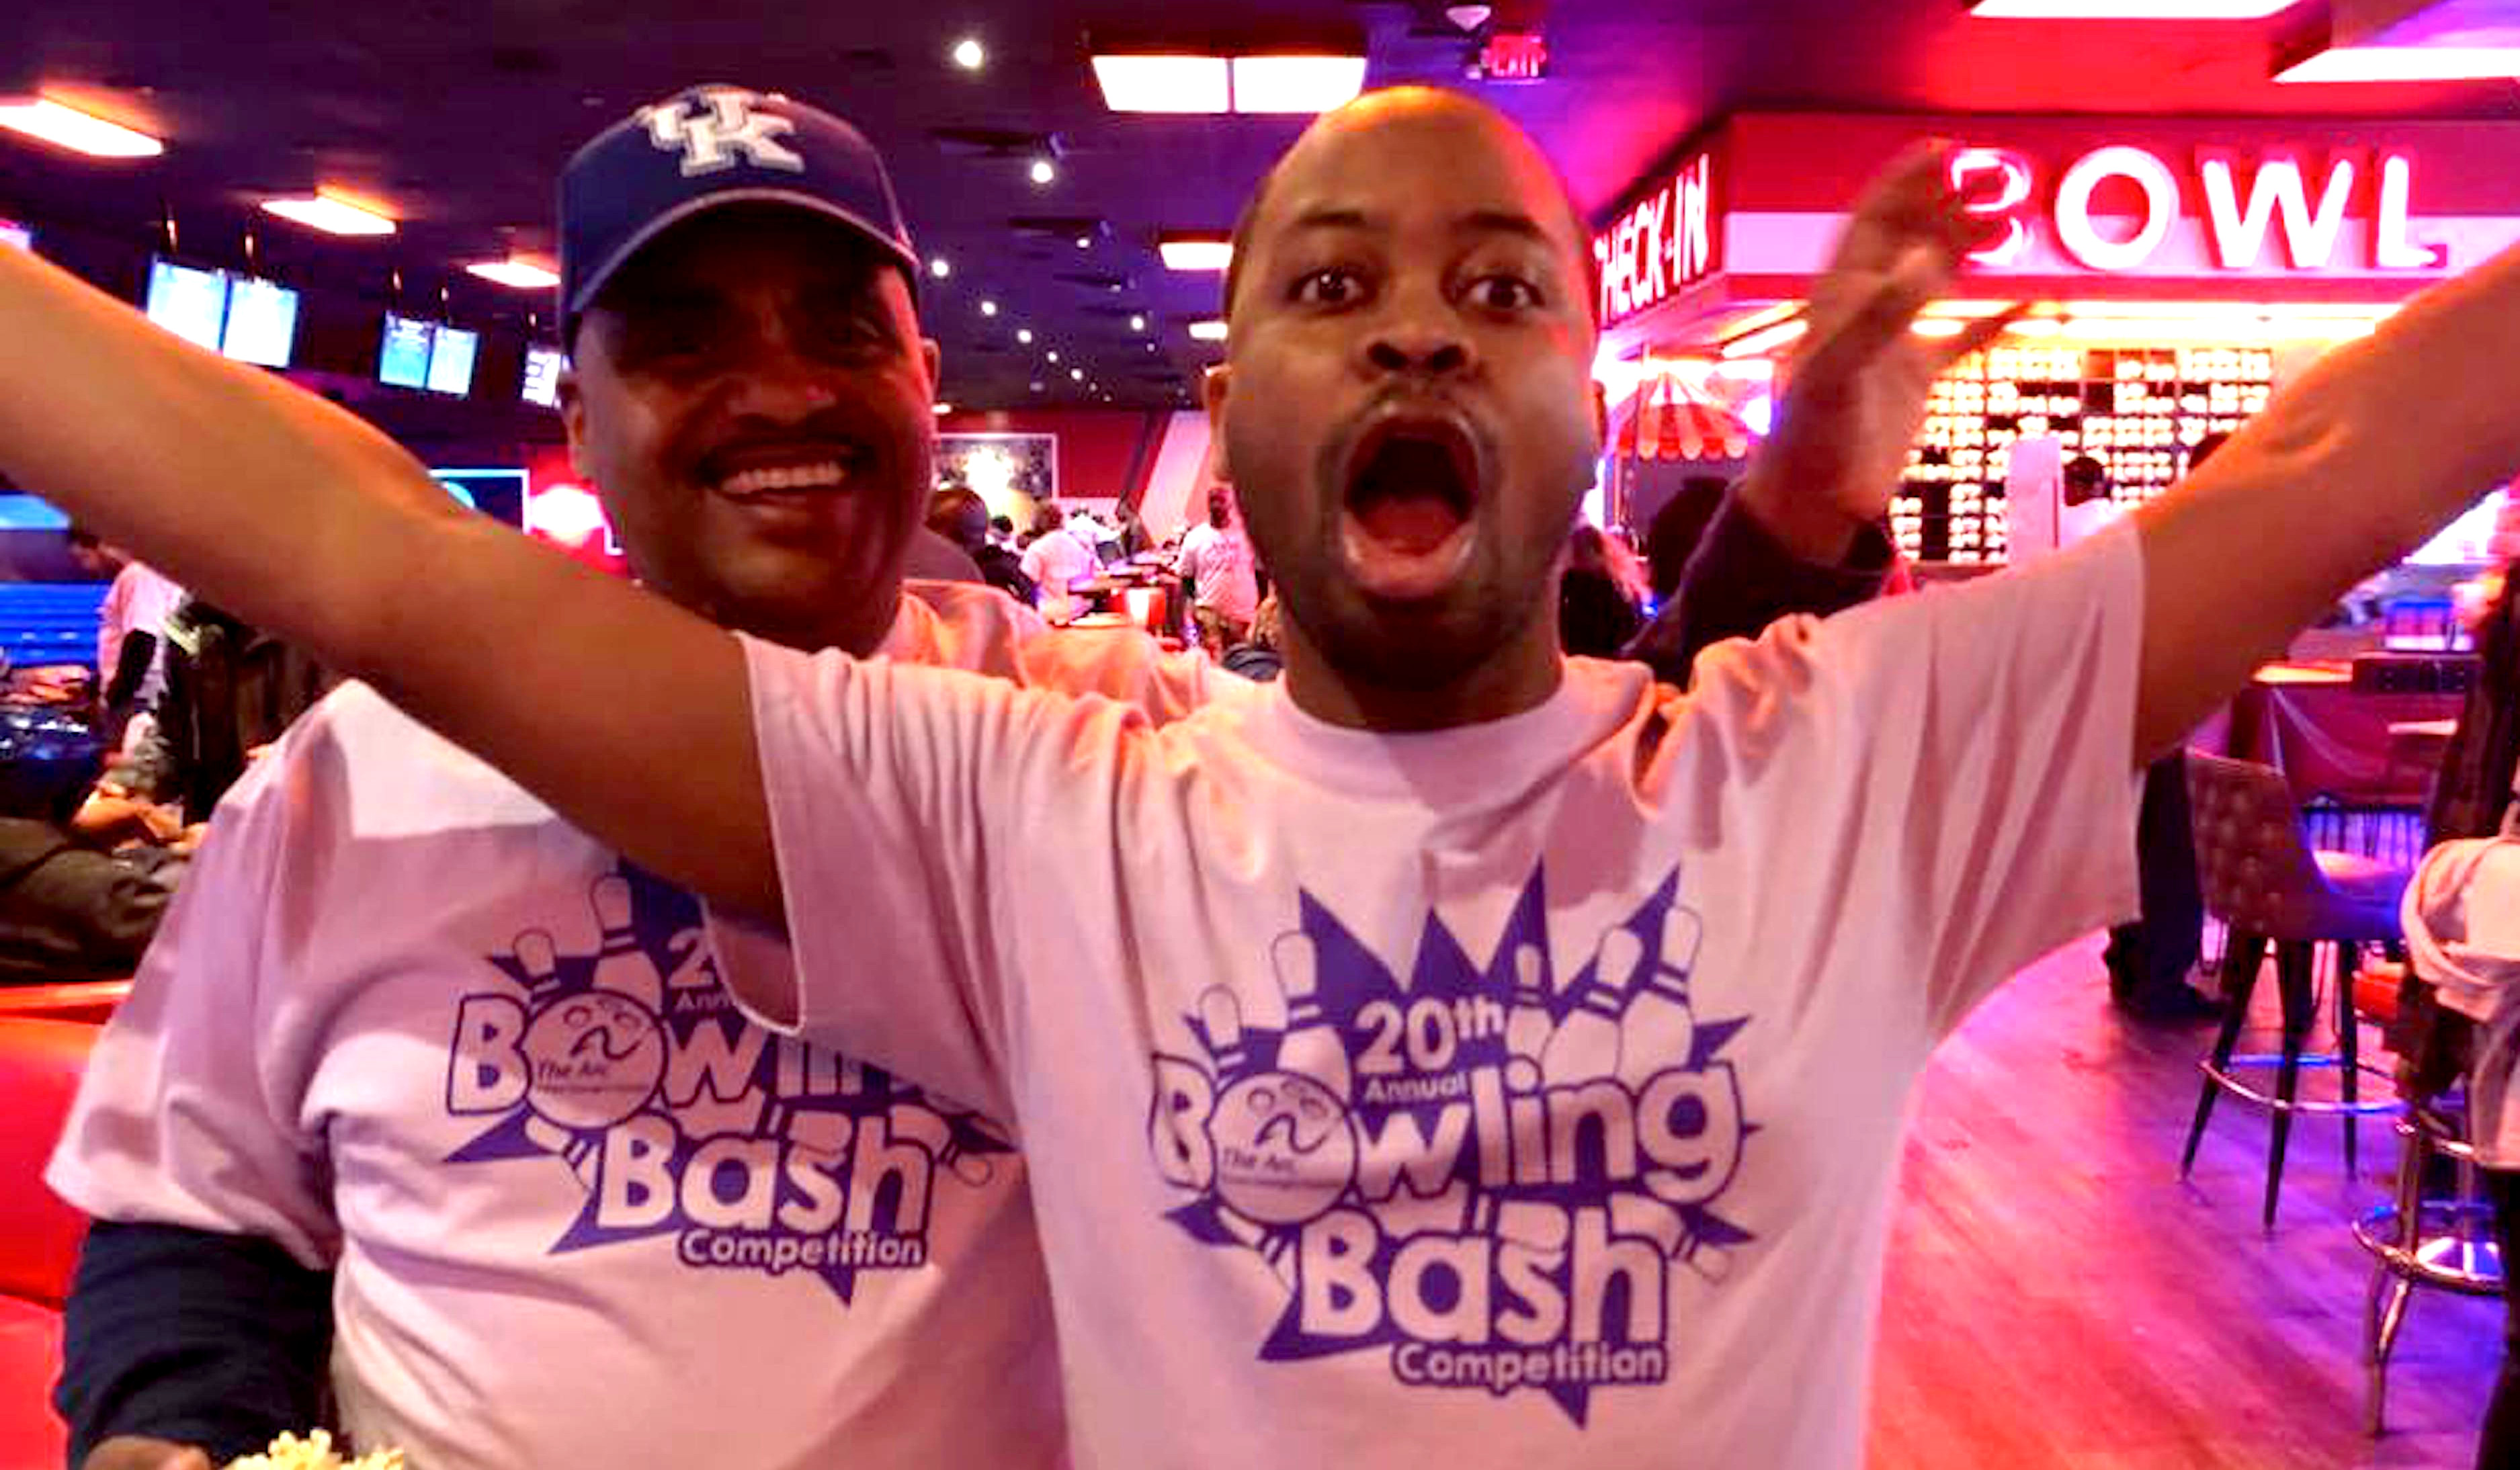 Two men celebrating ARC at a Bowling event